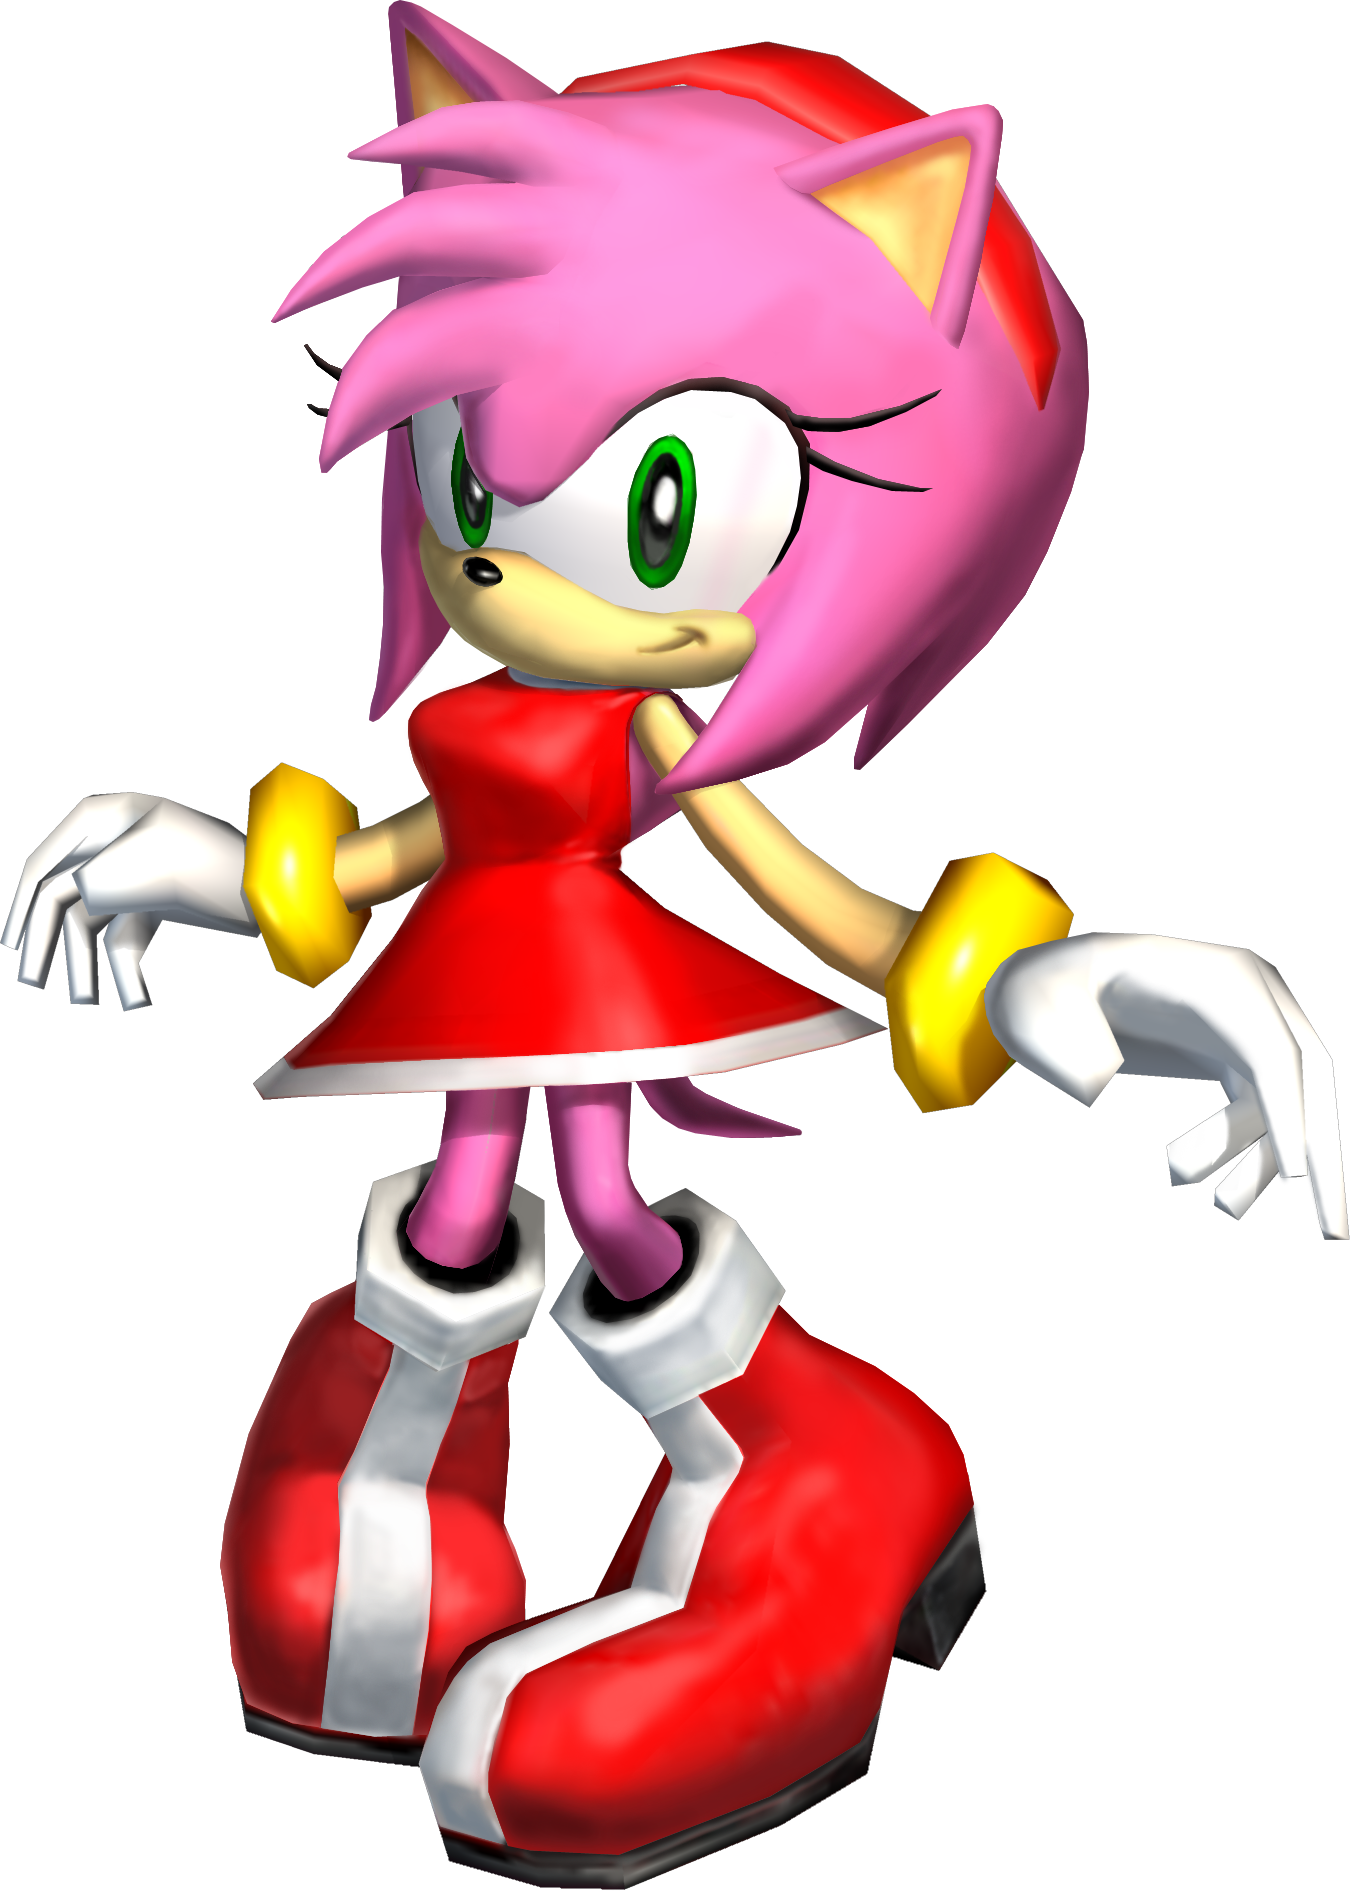 Gallery » Official Art » Amy Rose » Sonic Adventure - Sonic Adventure 2 Battle Amy (1350x1891)